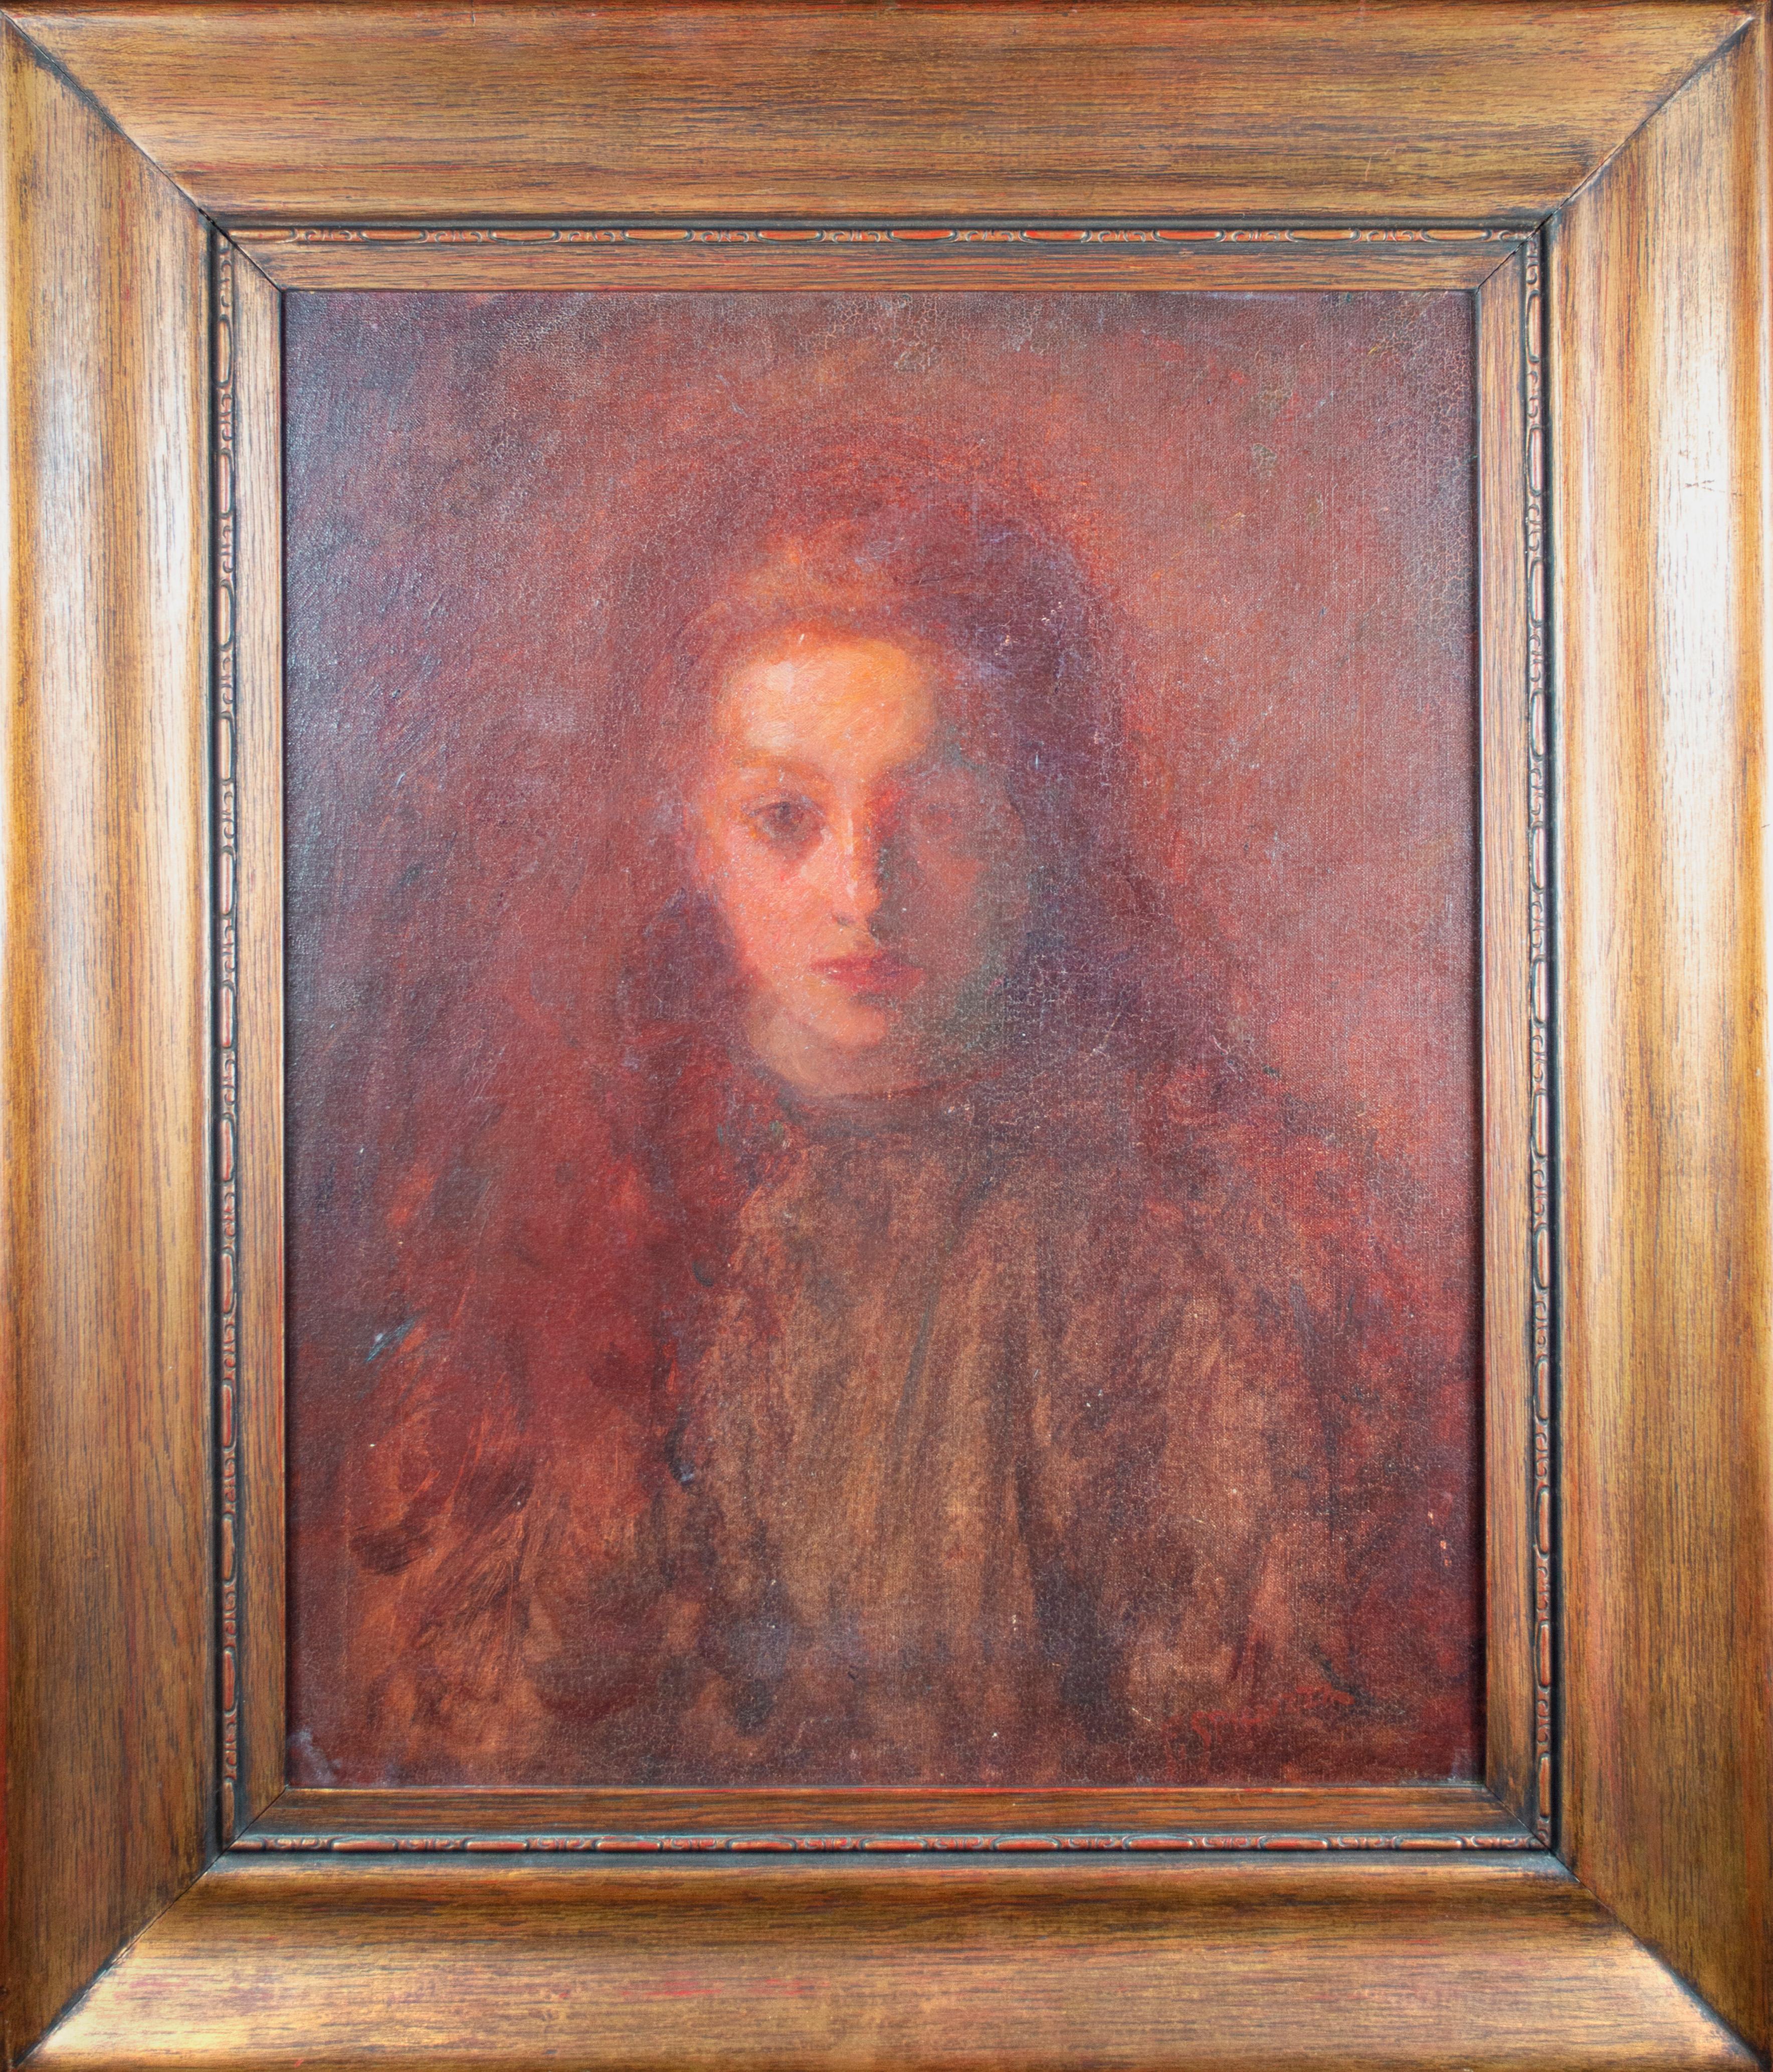 Francesco Spicuzza Portrait Painting - 'Little Mary Spicuzza' signed oil painting of the artist's niece